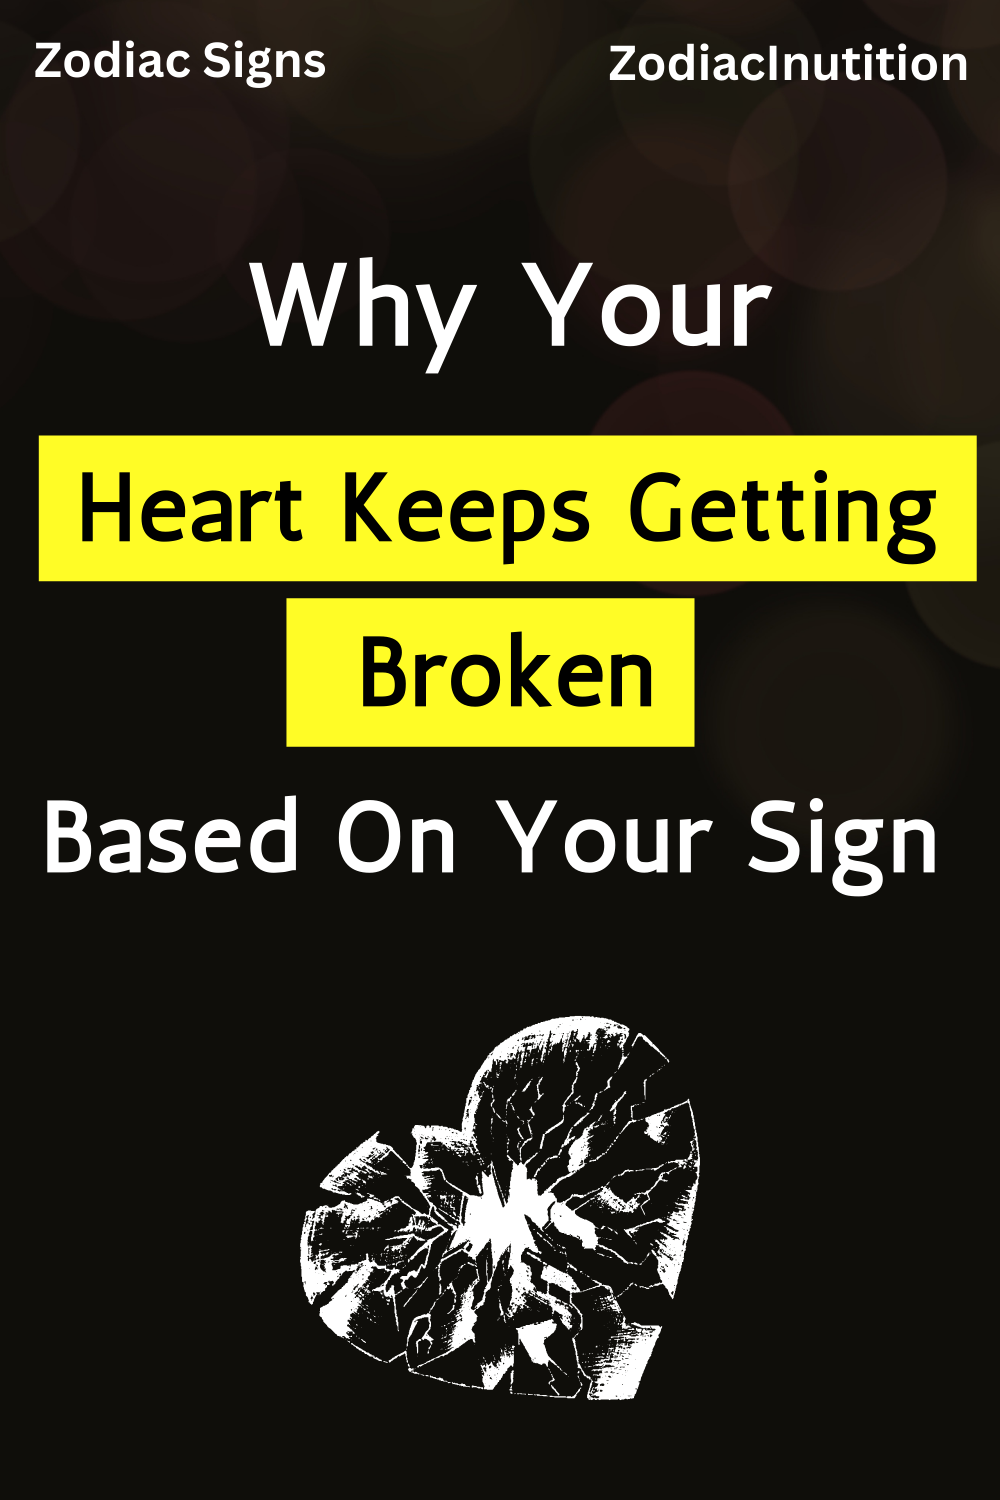 Why Your Heart Keeps Getting Broken Based On Your Sign